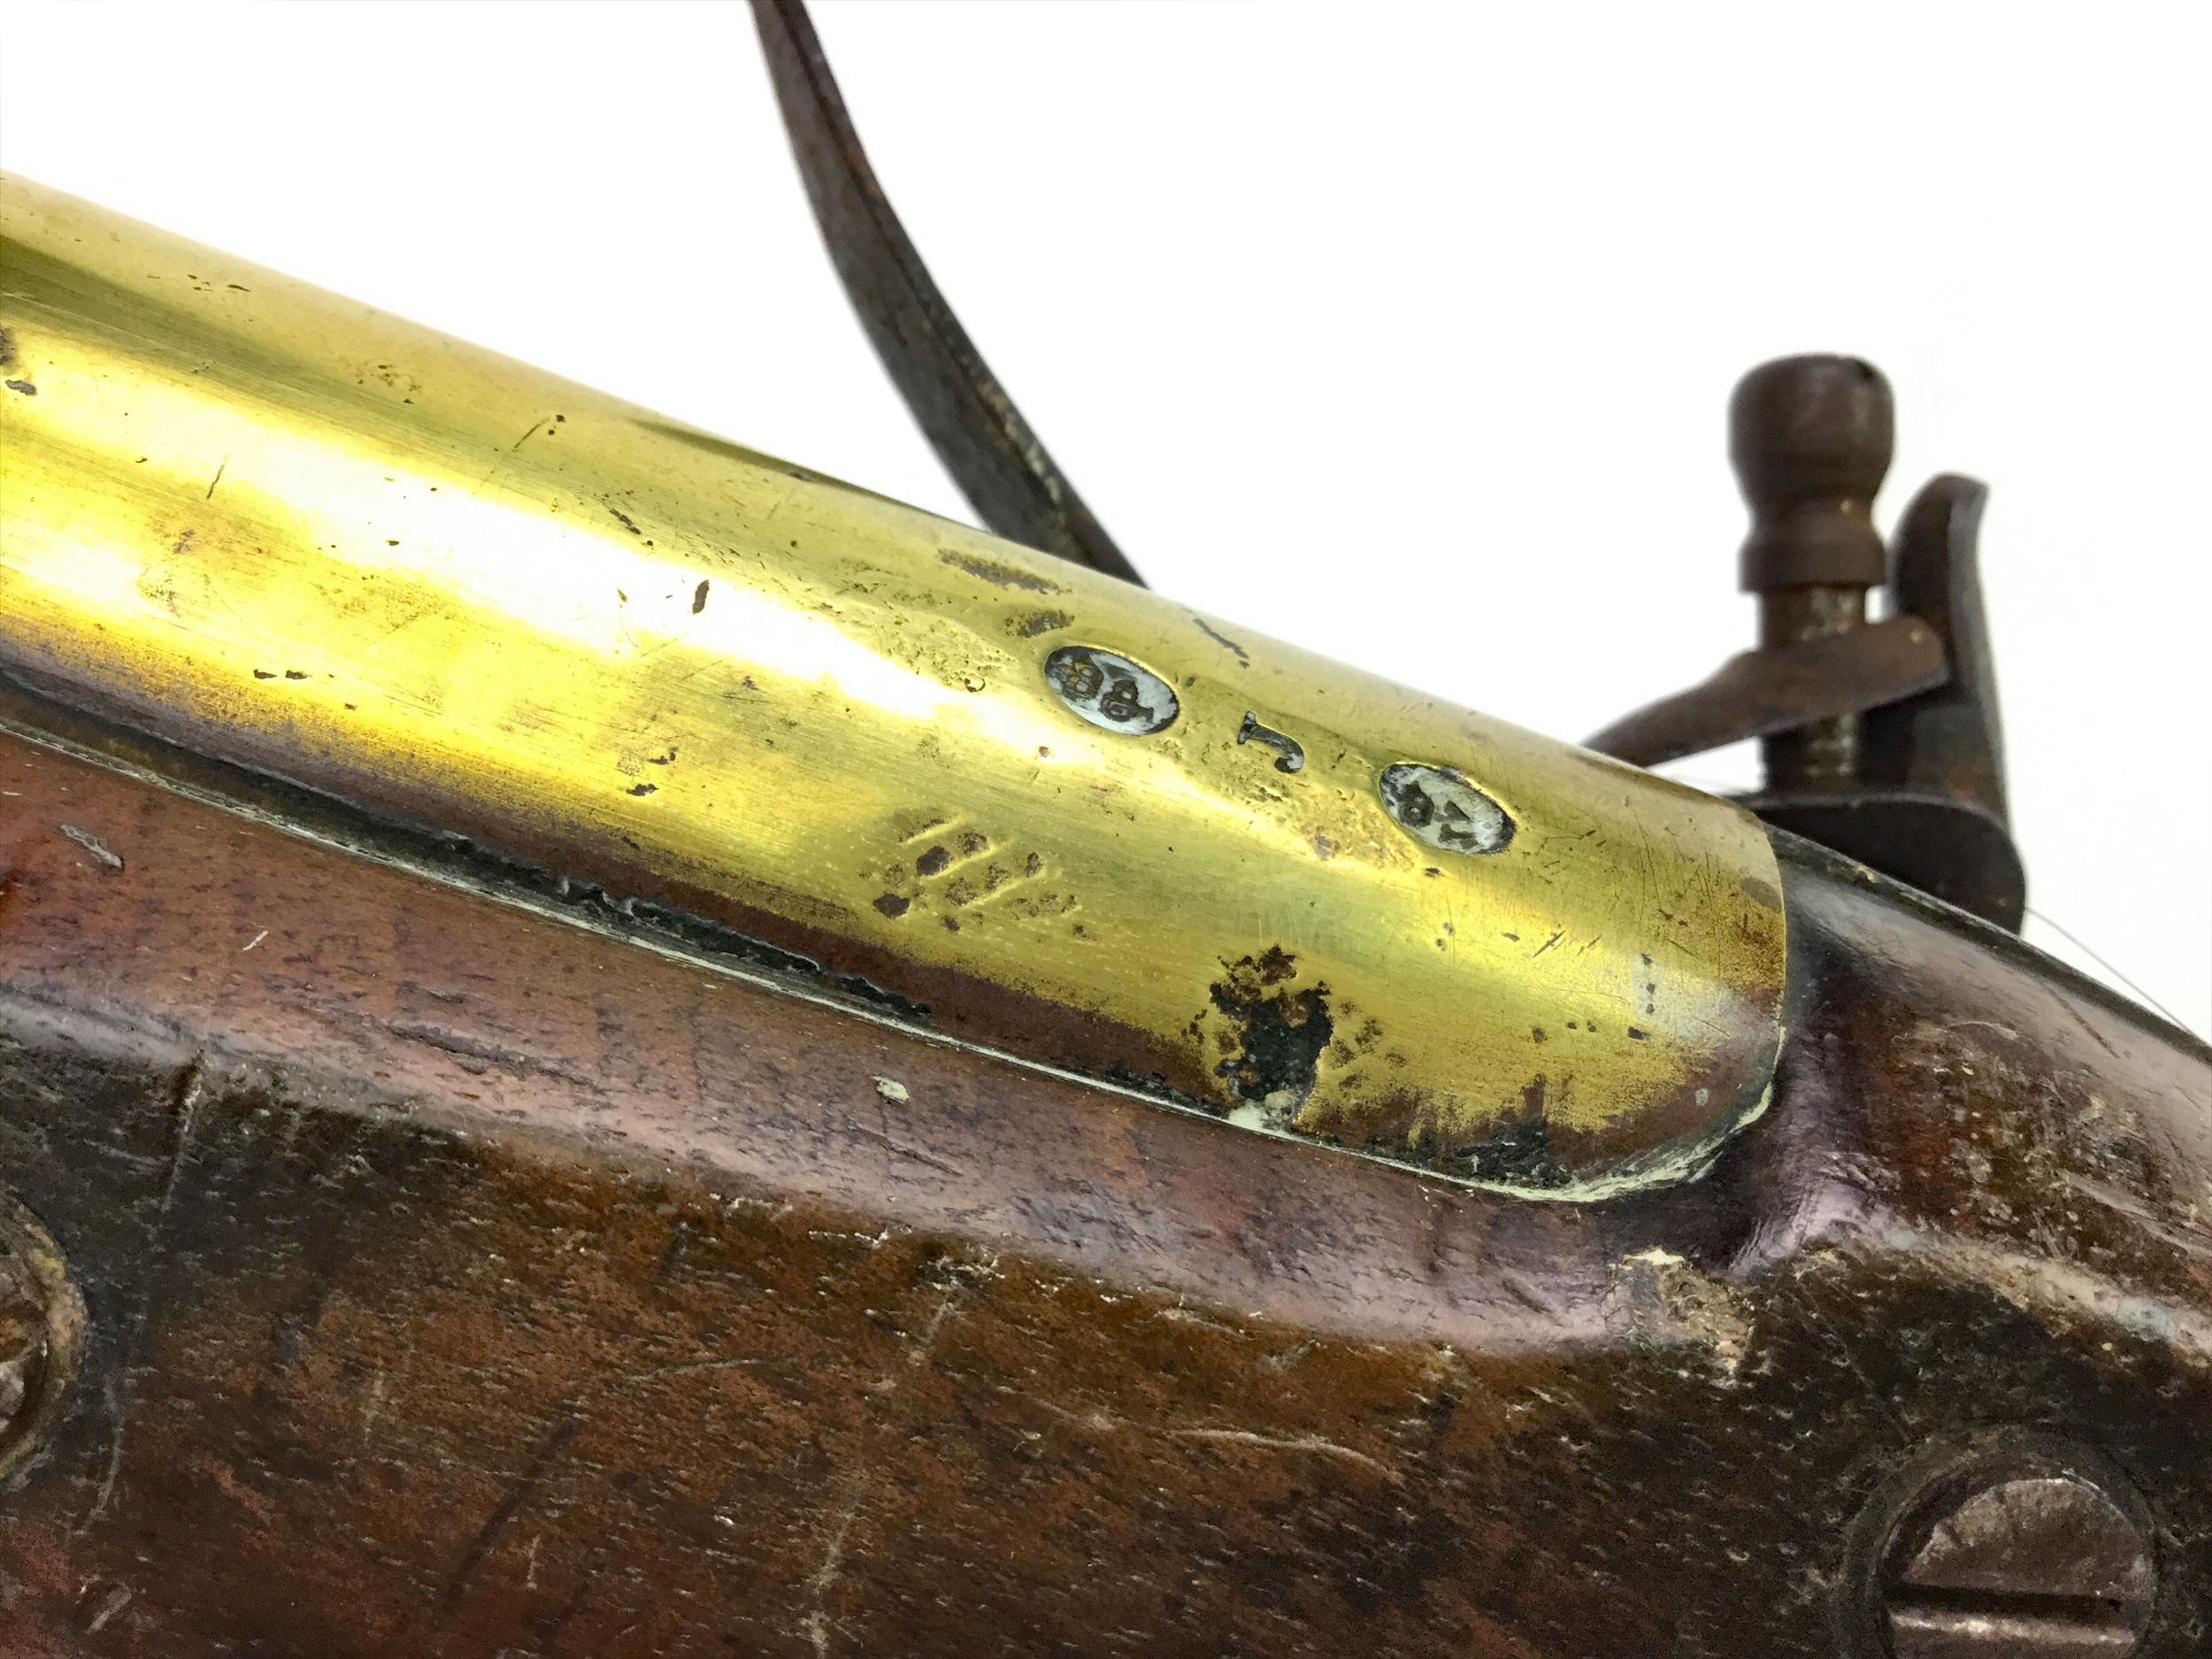 AN EARLY 19TH CENTURY BLUNDERBUSS - Image 2 of 2